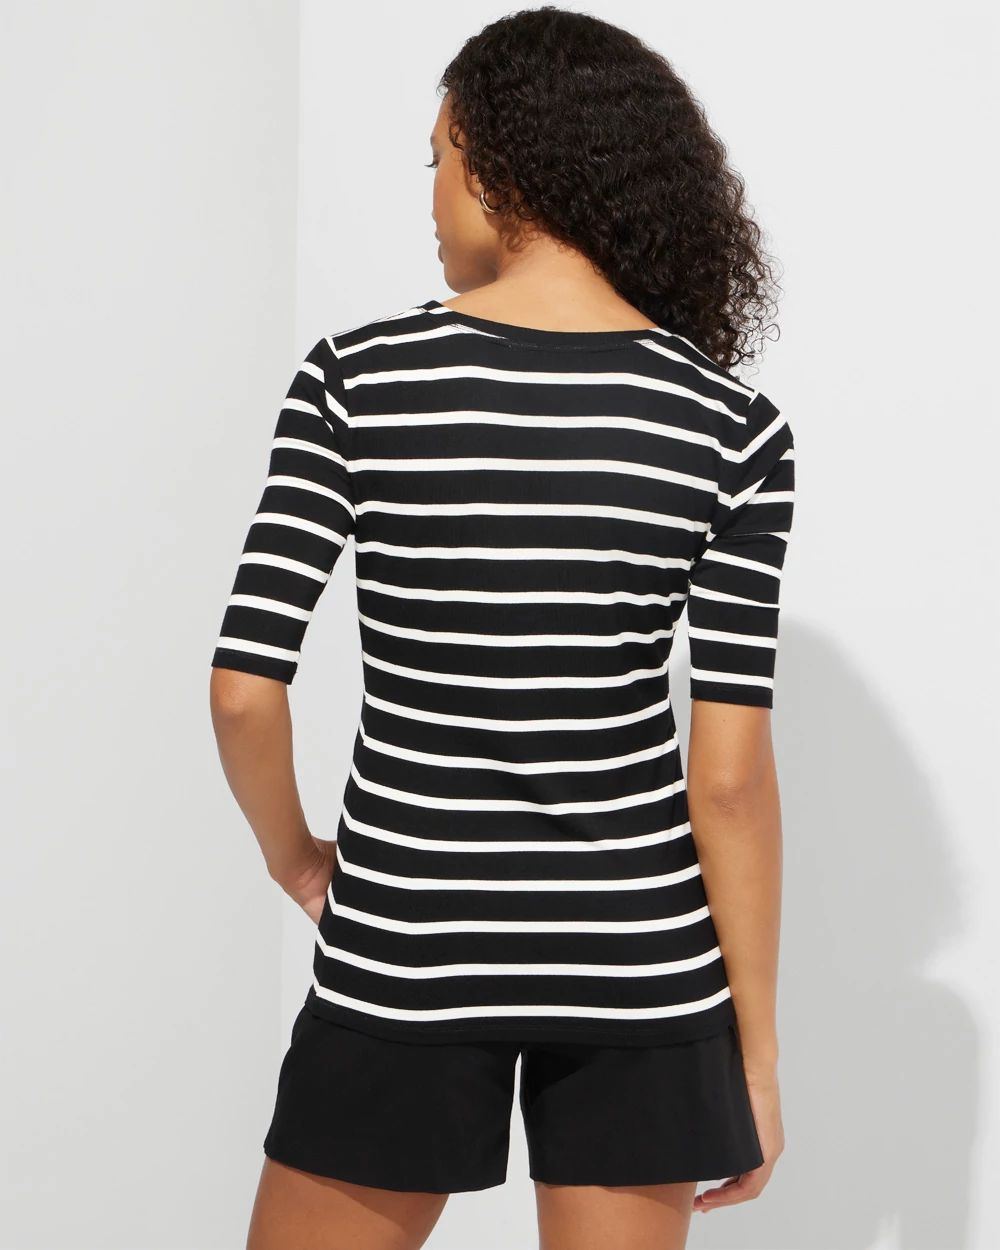 Outlet WHBM Elbow Sleeve V-Neck Knit Tee click to view larger image.